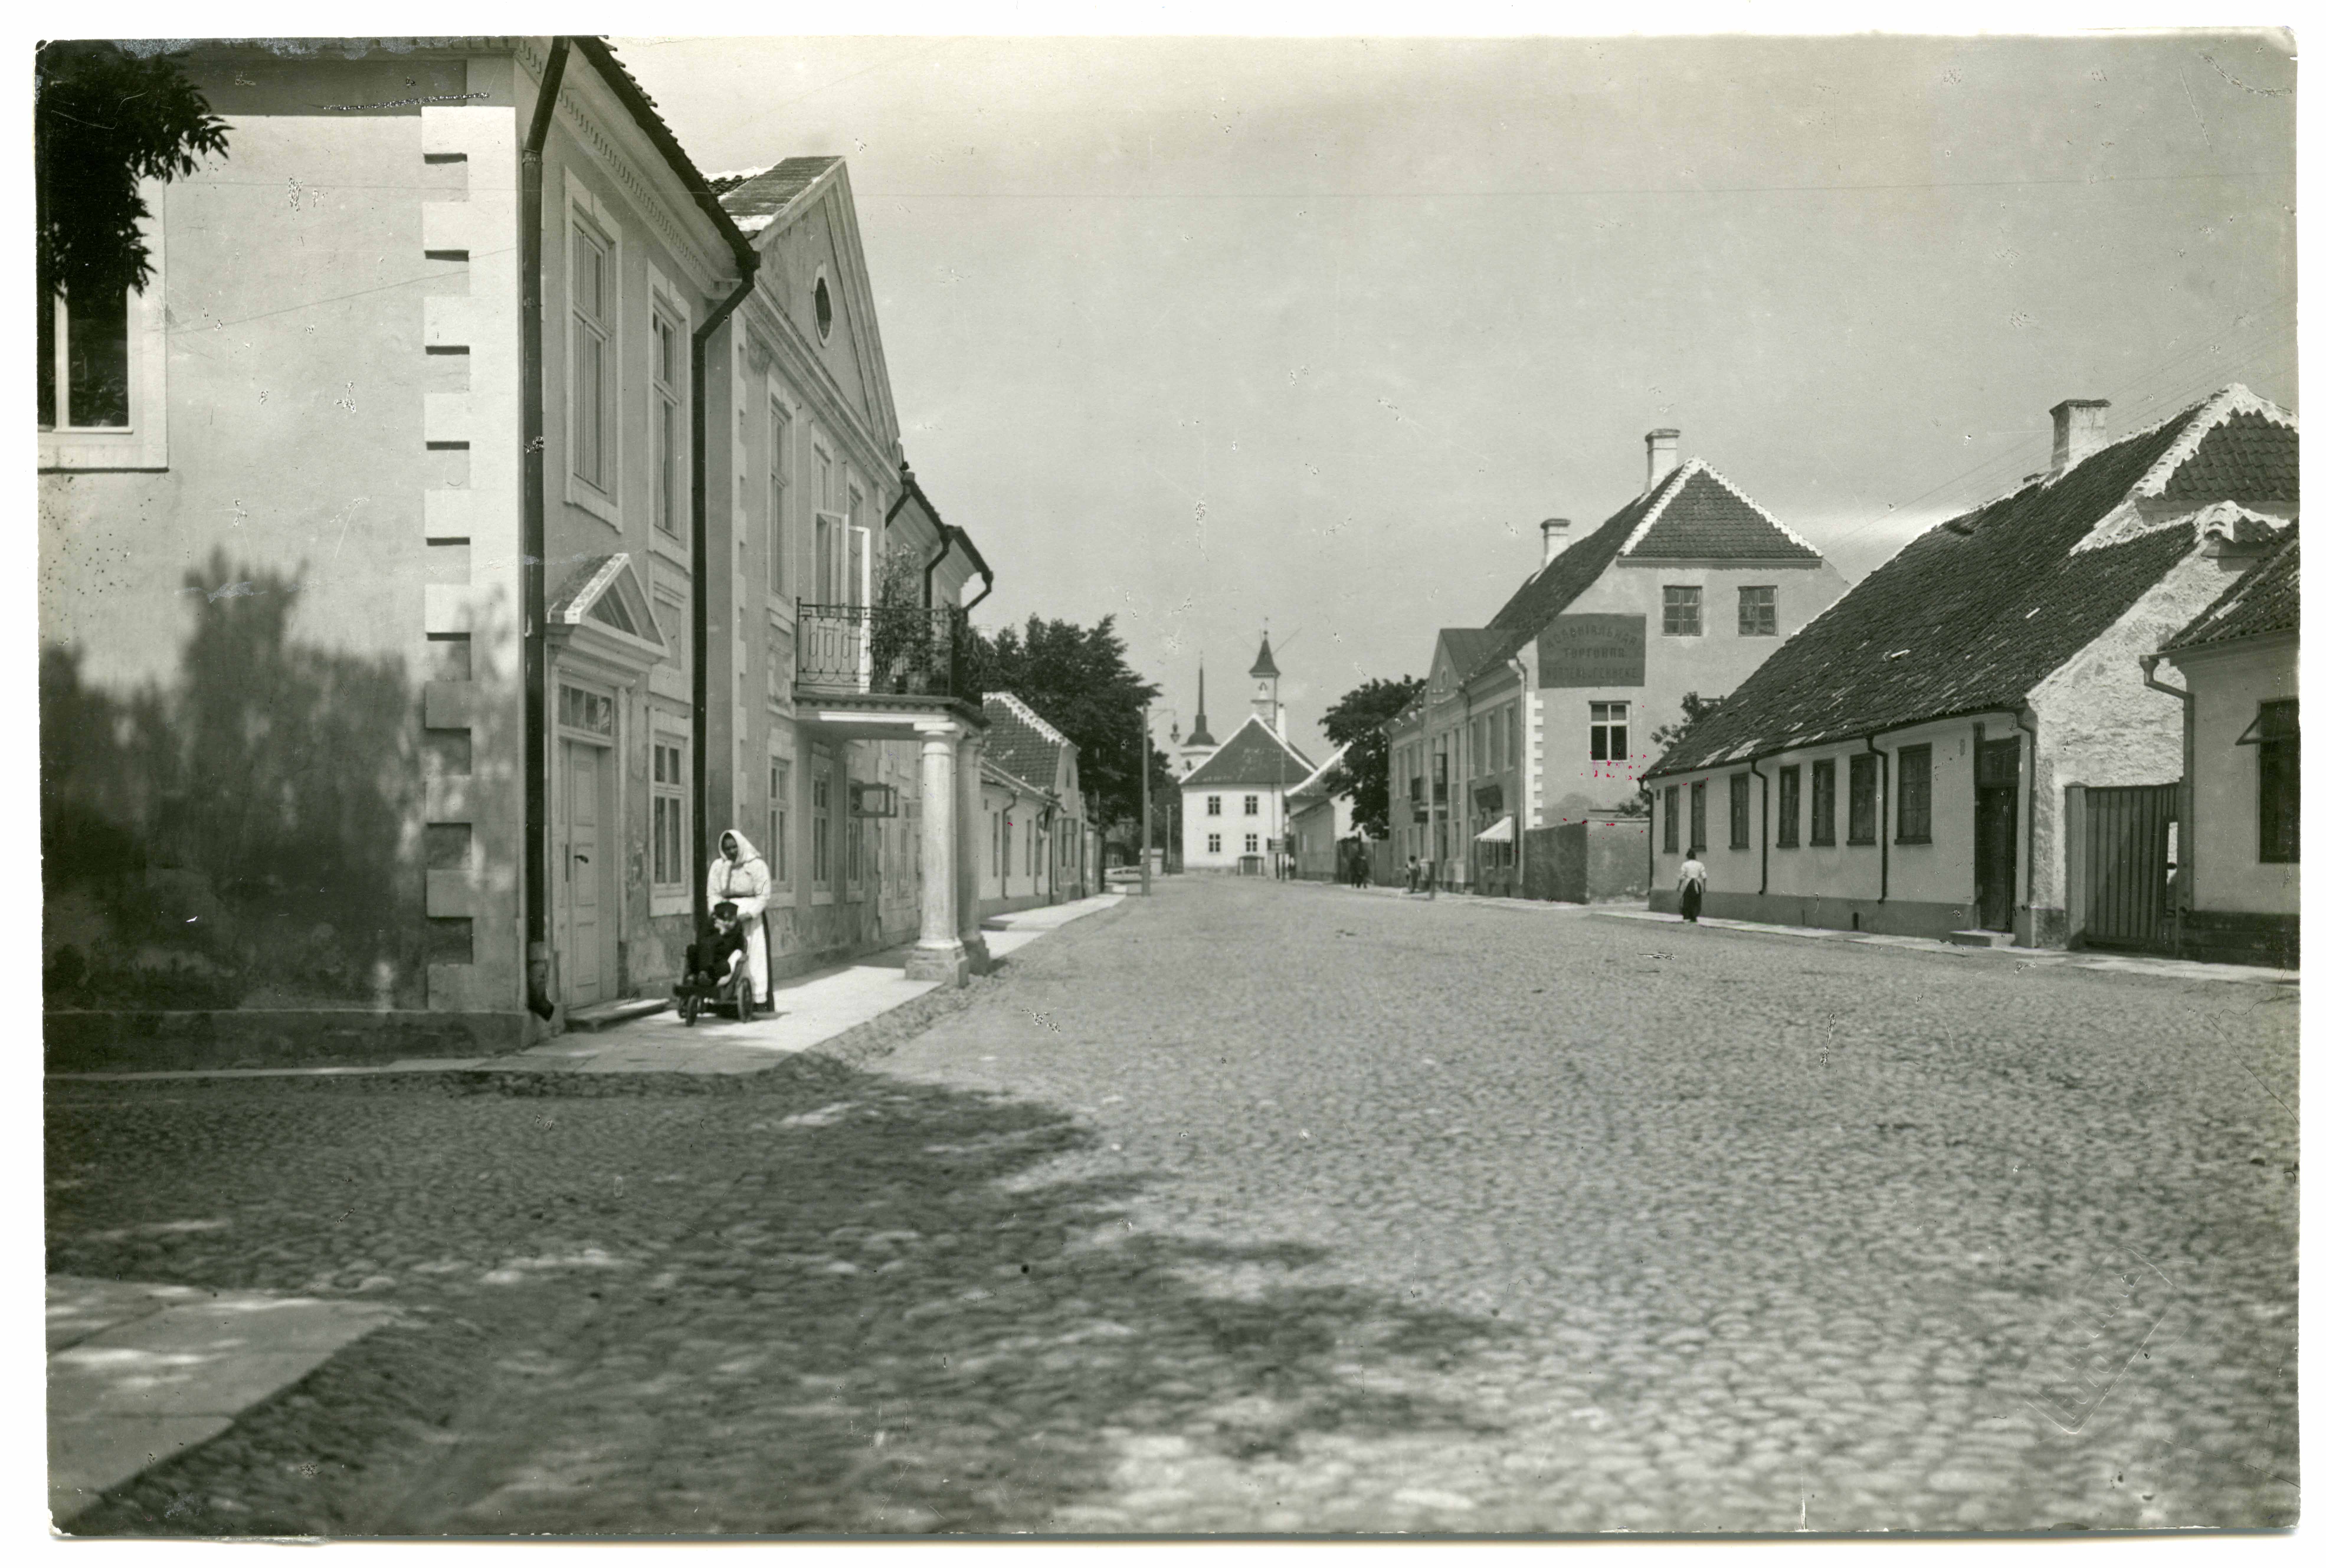 View of the castle street Anton Lutsu from the corner of the building towards no